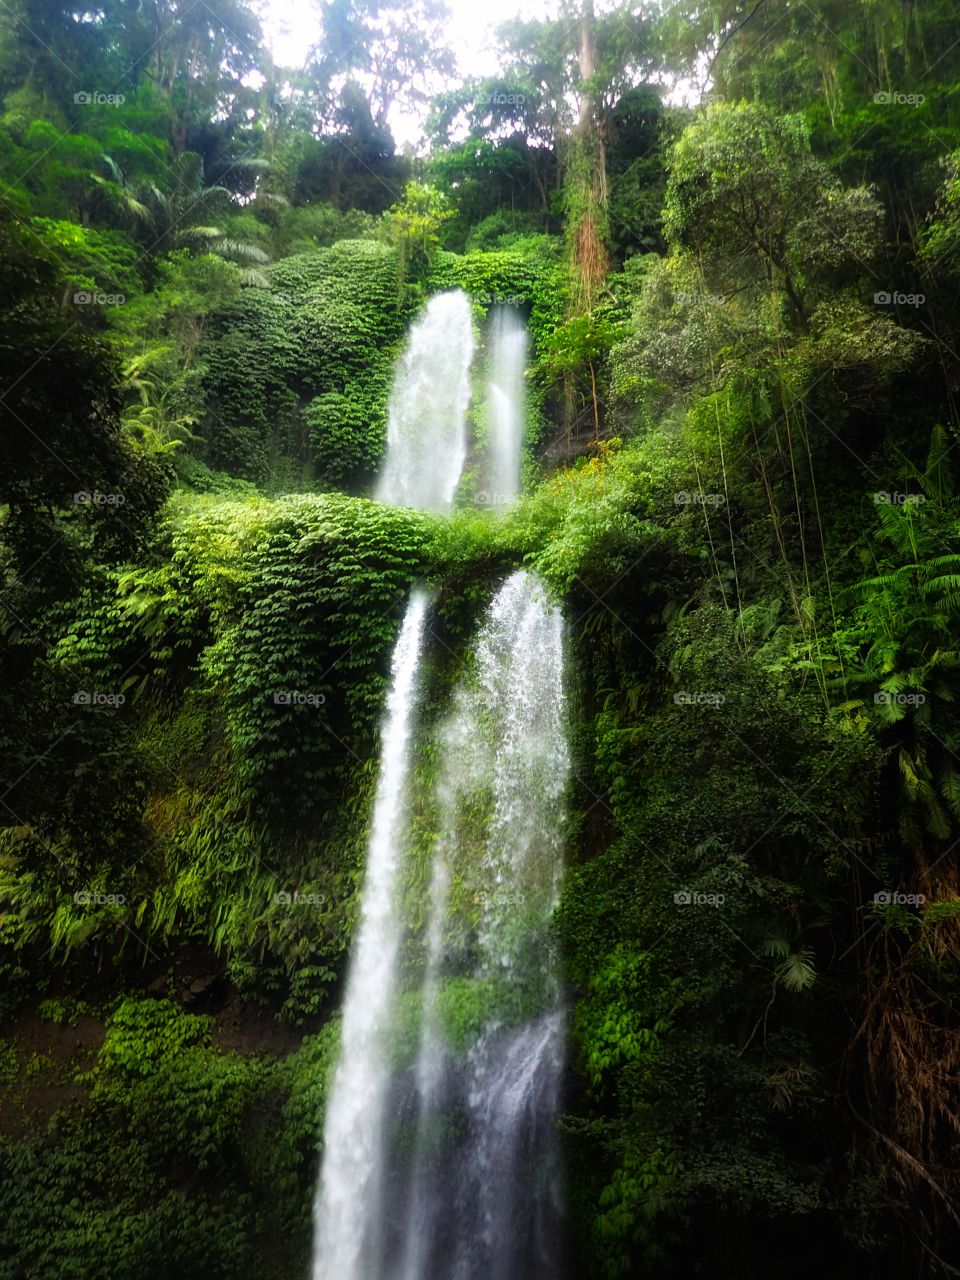 Beauty Waterfall .Let's go green, feel fresh and enjoy the nature.Keep our nature safe.